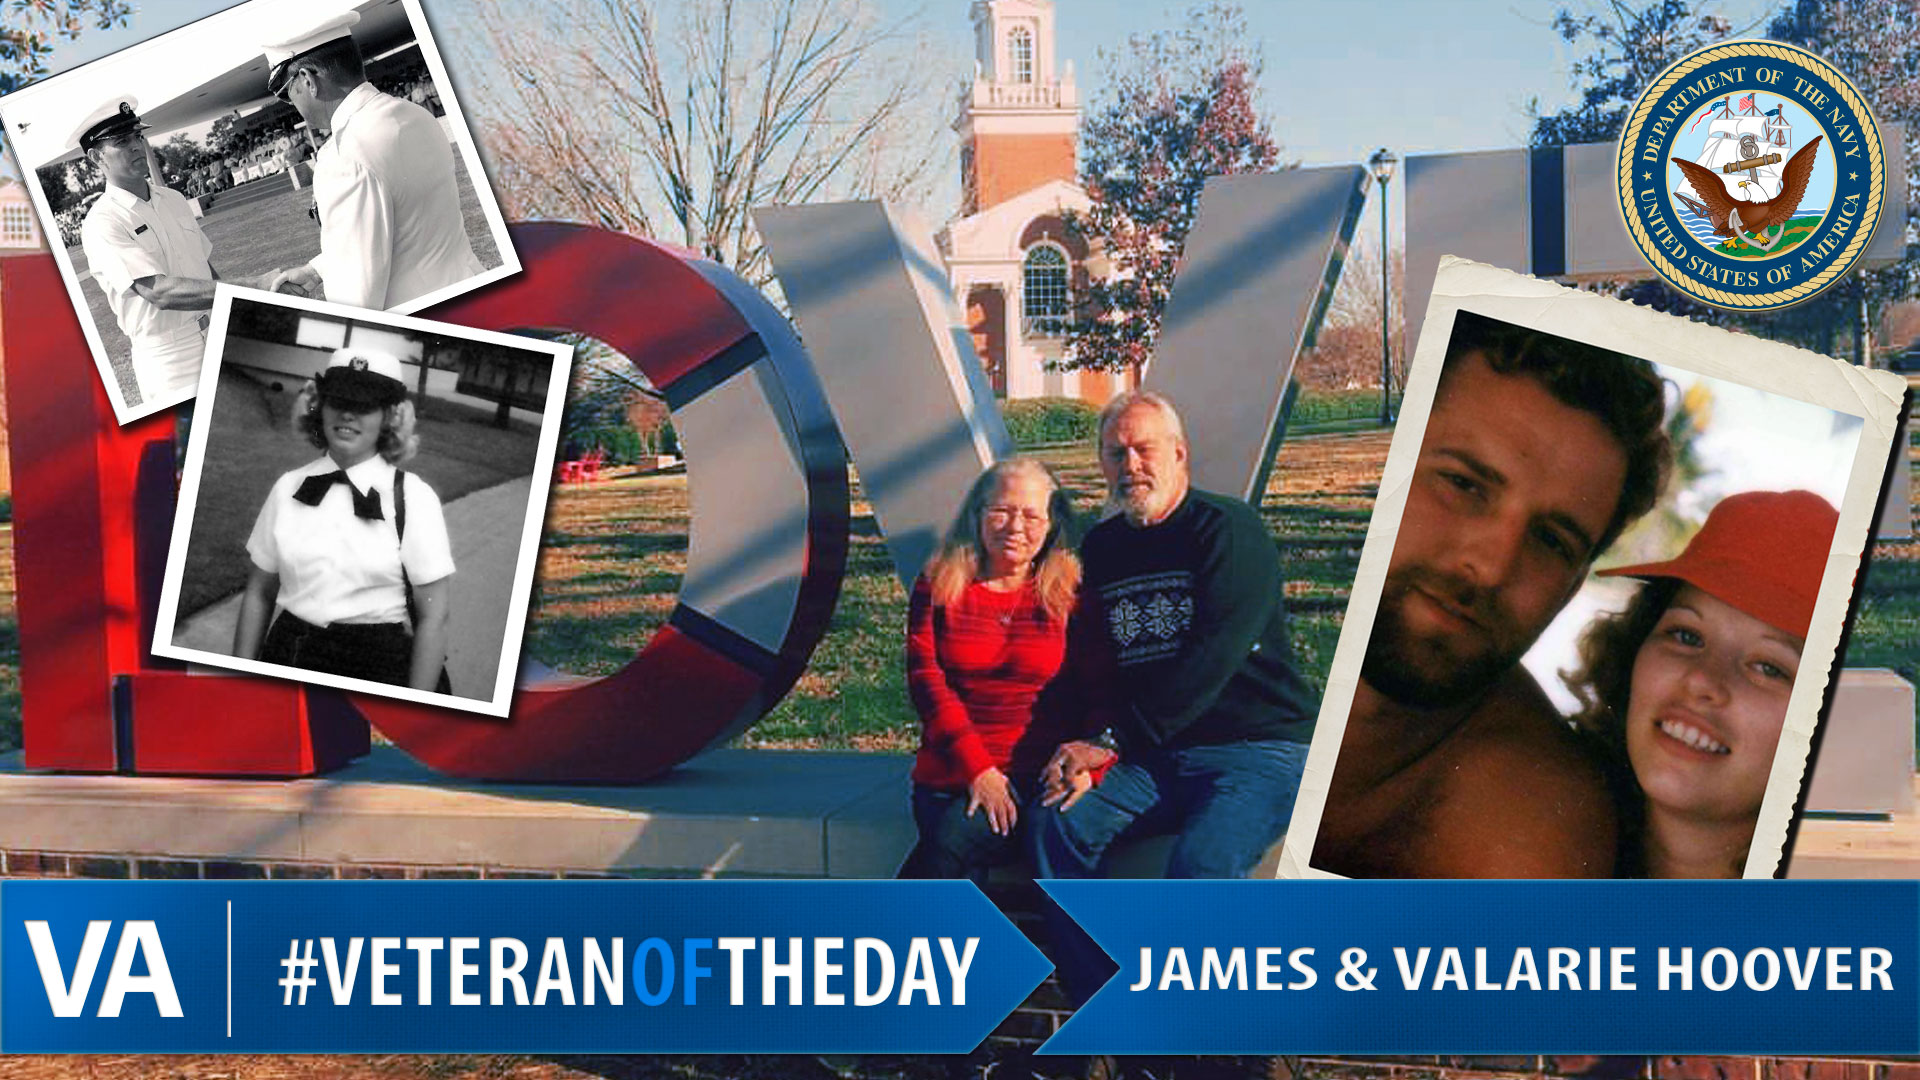 James and Valarie Hoover - Veteran of the Day